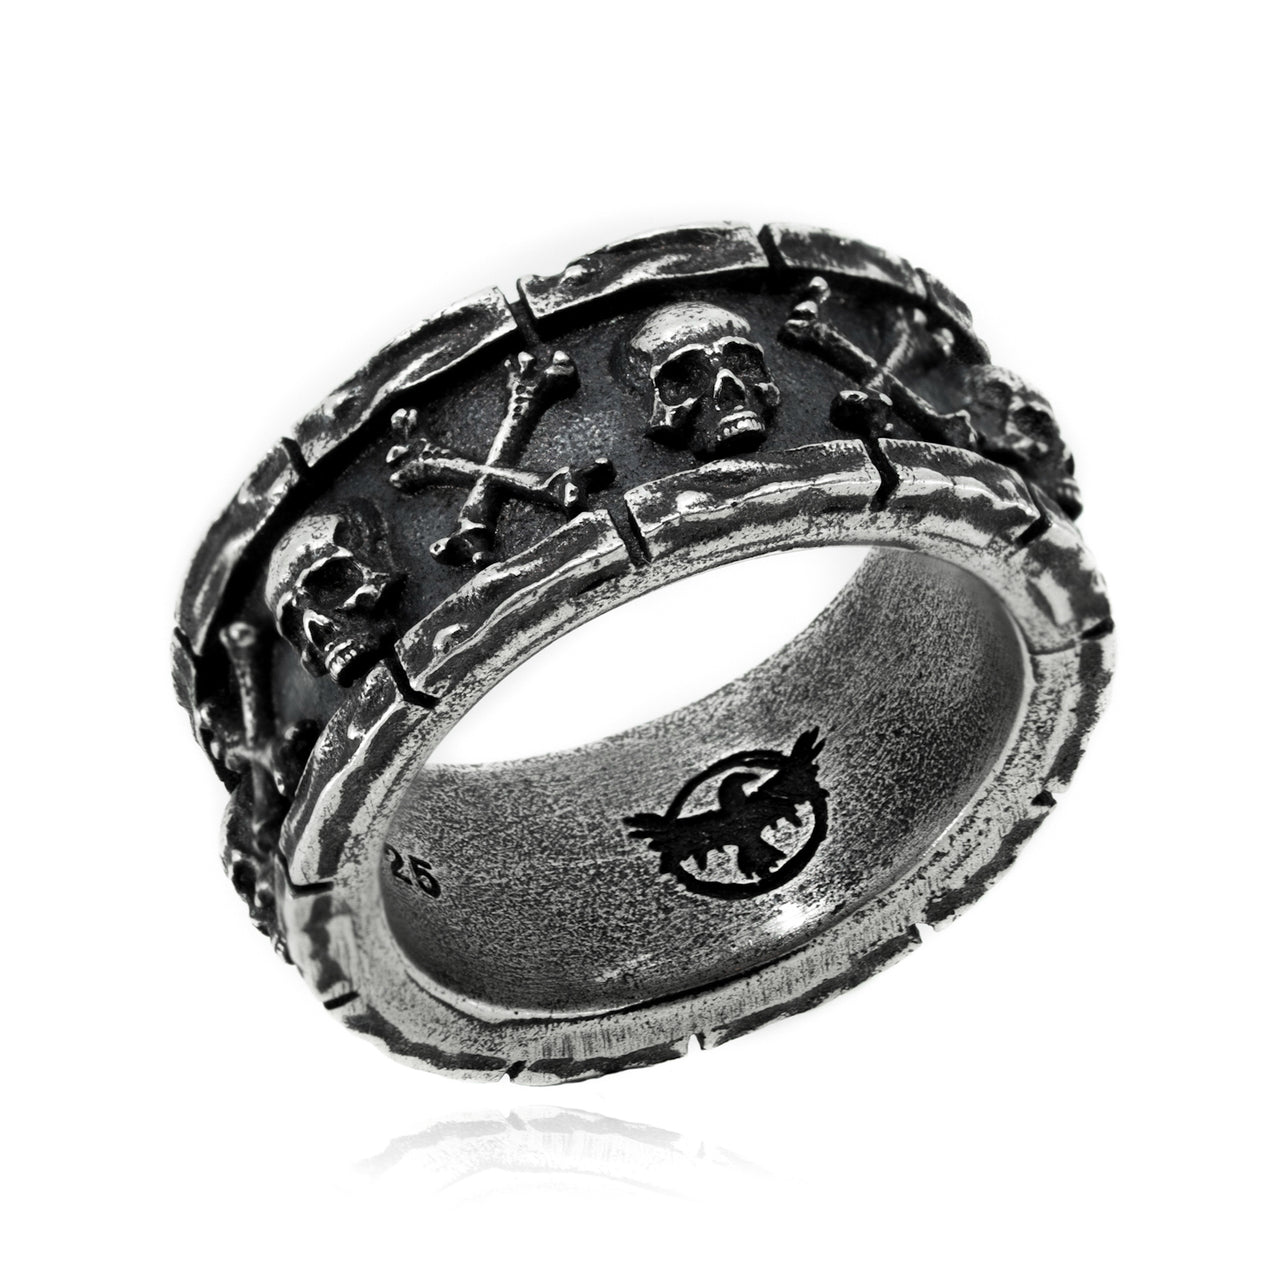 Crypt Ring - Chunky Sterling Silver Band Ring - Gothic Jewellery